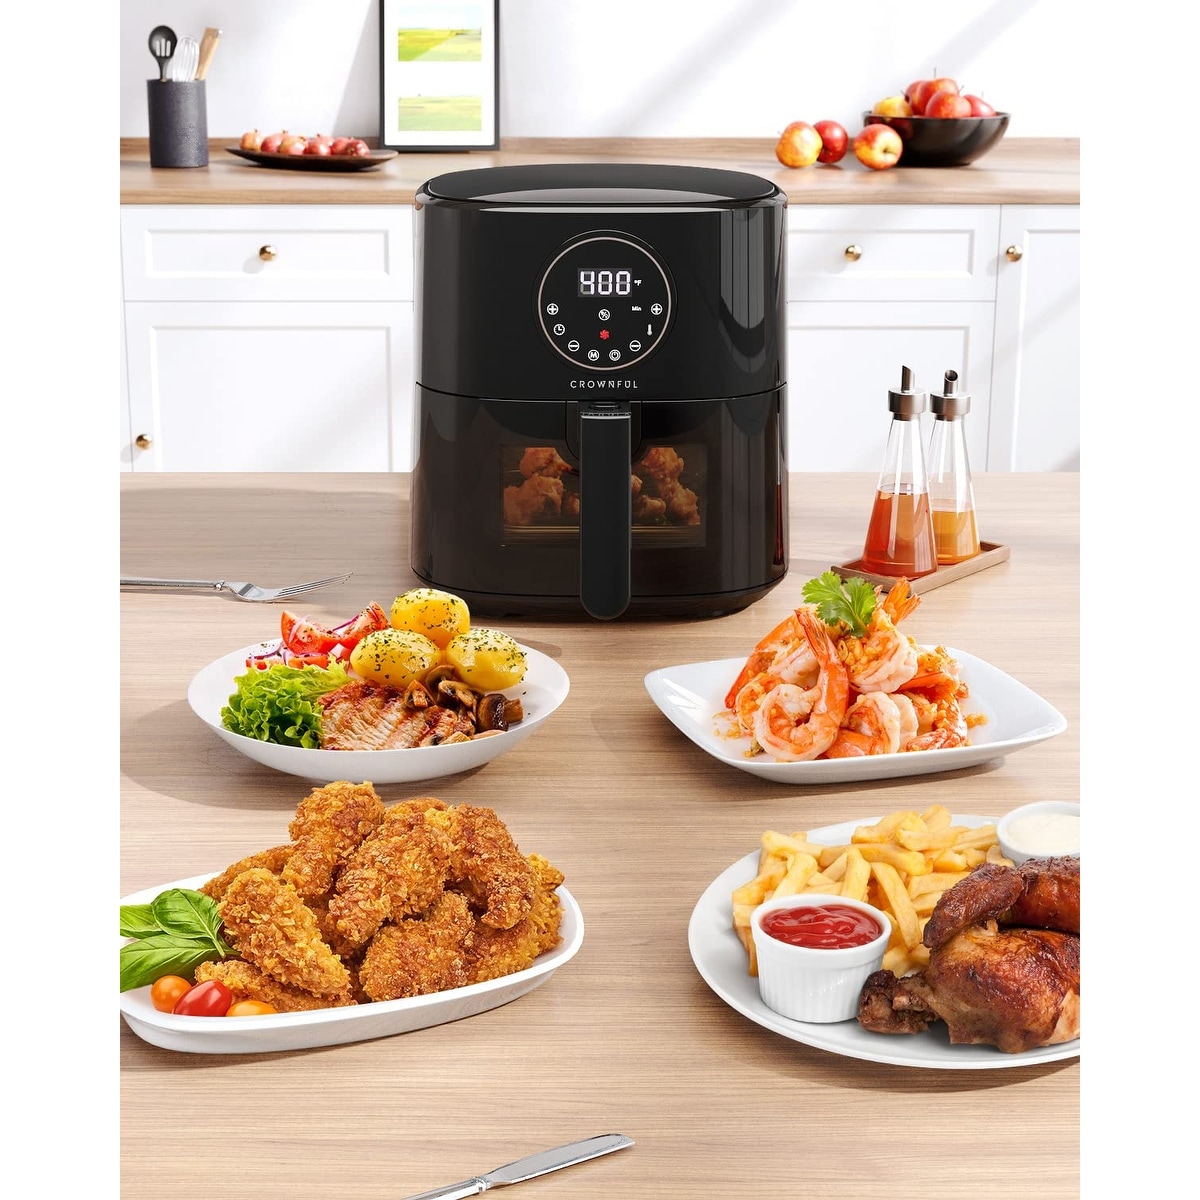 5 Quart Air Fryer with Viewing Window, Oilless Cooker, LCD Digital Touch Screen, 7 Cooking Presets and 53 Recipes